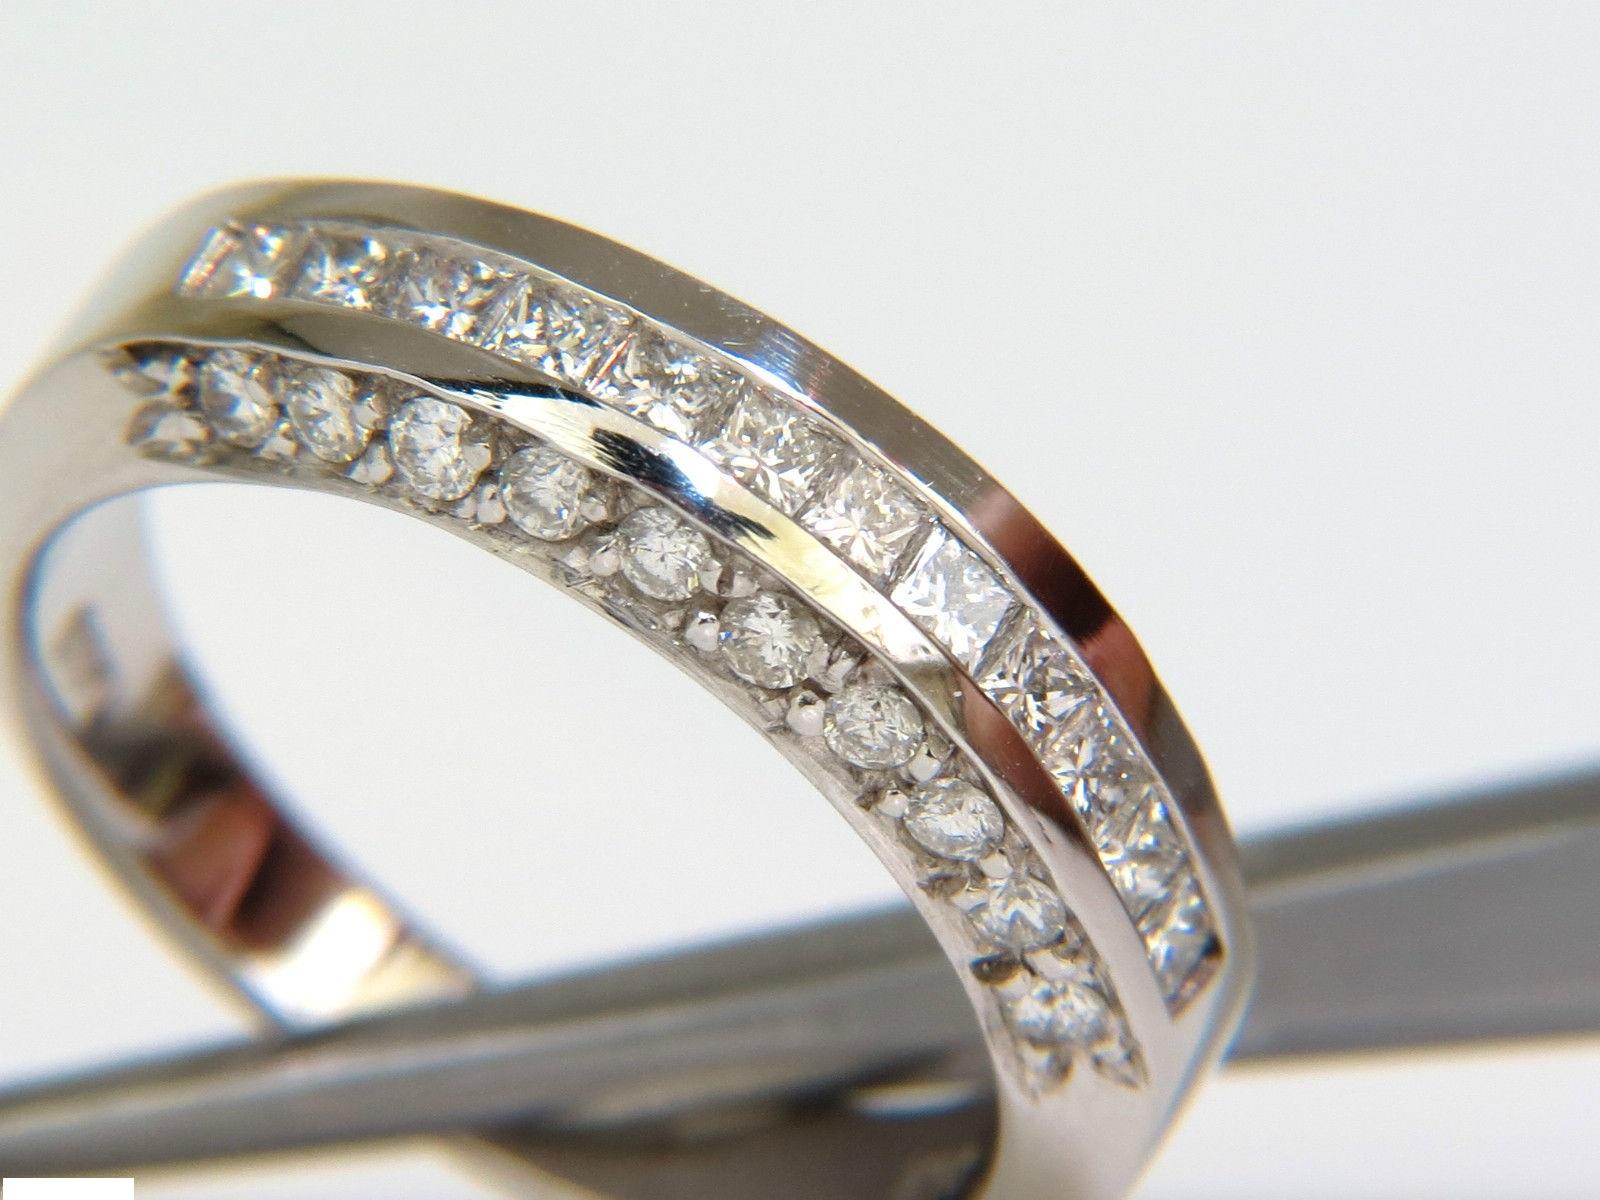 1.20ct. Princes, and rounds diamond band. 
with gorgeous side pave set diamonds
all done by hand!

Full cut princess' and rounds.

G-H color, Vs-2 si-1 clarity.

14kt. White gold.

5.40mm thick 

$4500 Appraisal to accompany.

Current Size: 6 1/2